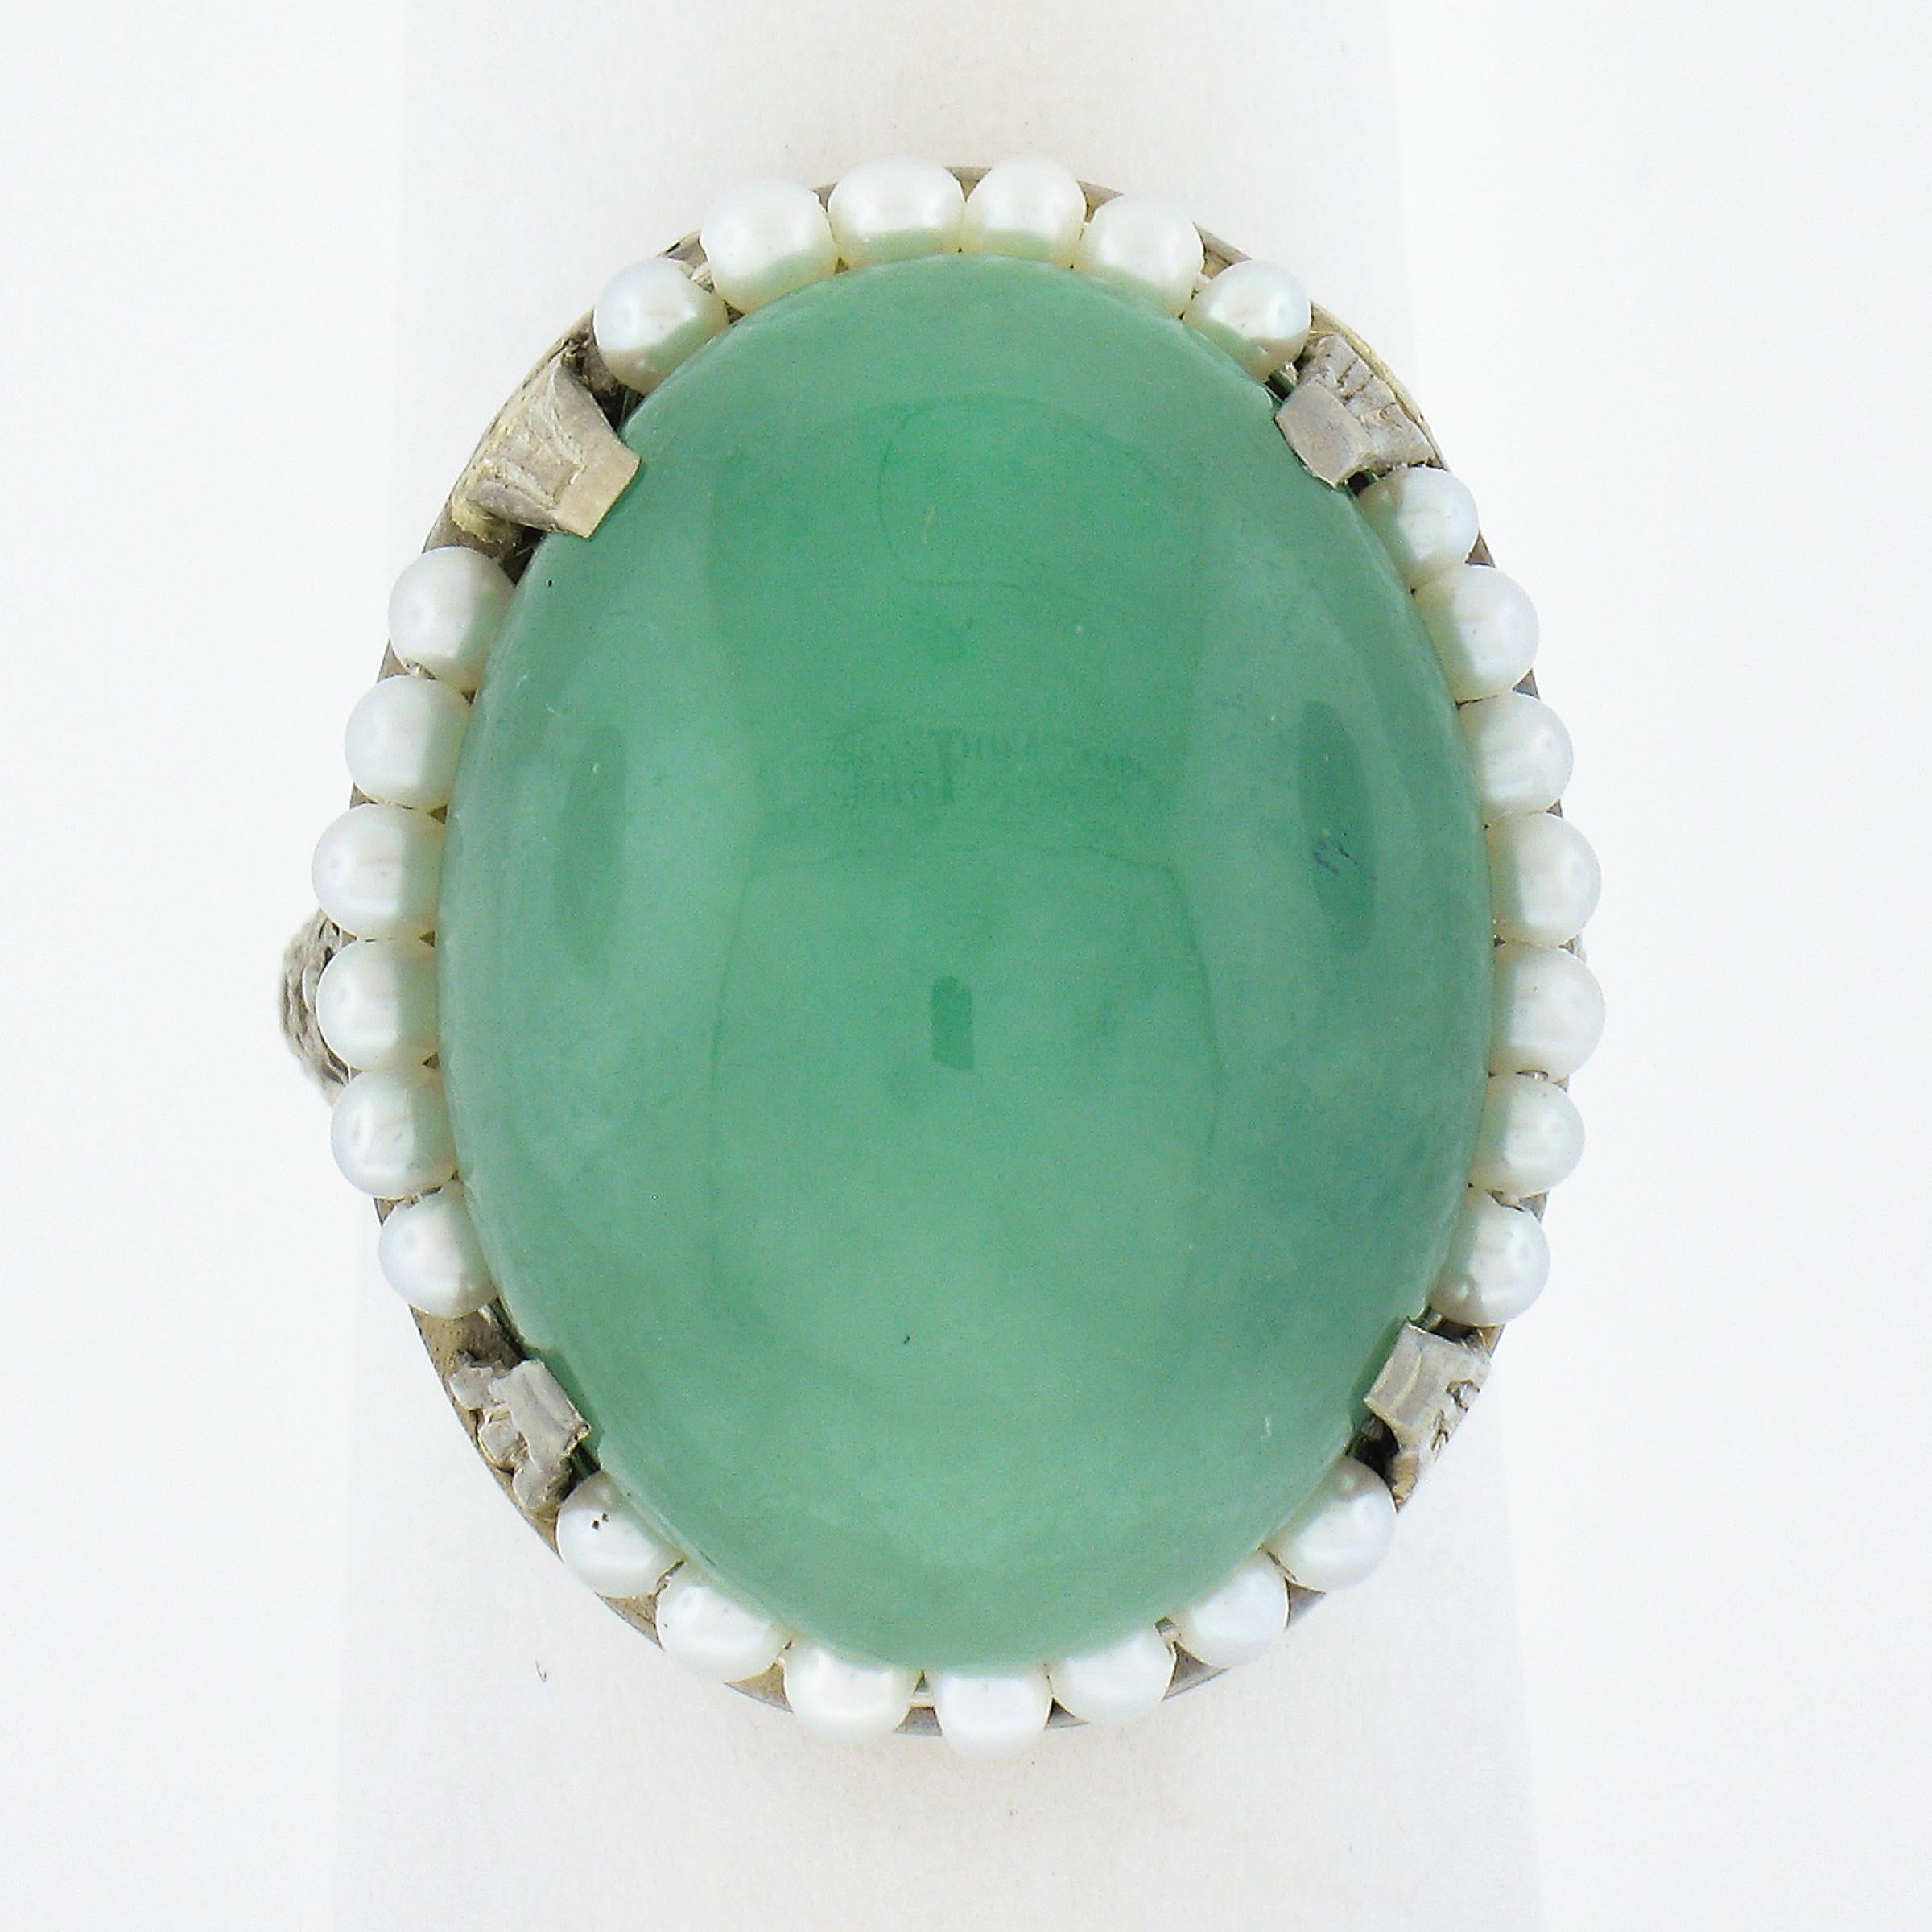 --Stone(s):--
(1) Natural Genuine Jade - Oval Cabochon Cut - Prong Set - Seafoam Green Color - 22.66ct (exact - certified) *See Certification Details Below* 
Numerous Cultured Genuine Seed Pearls - Round Shape - Wire Set - White Color - 2mm each